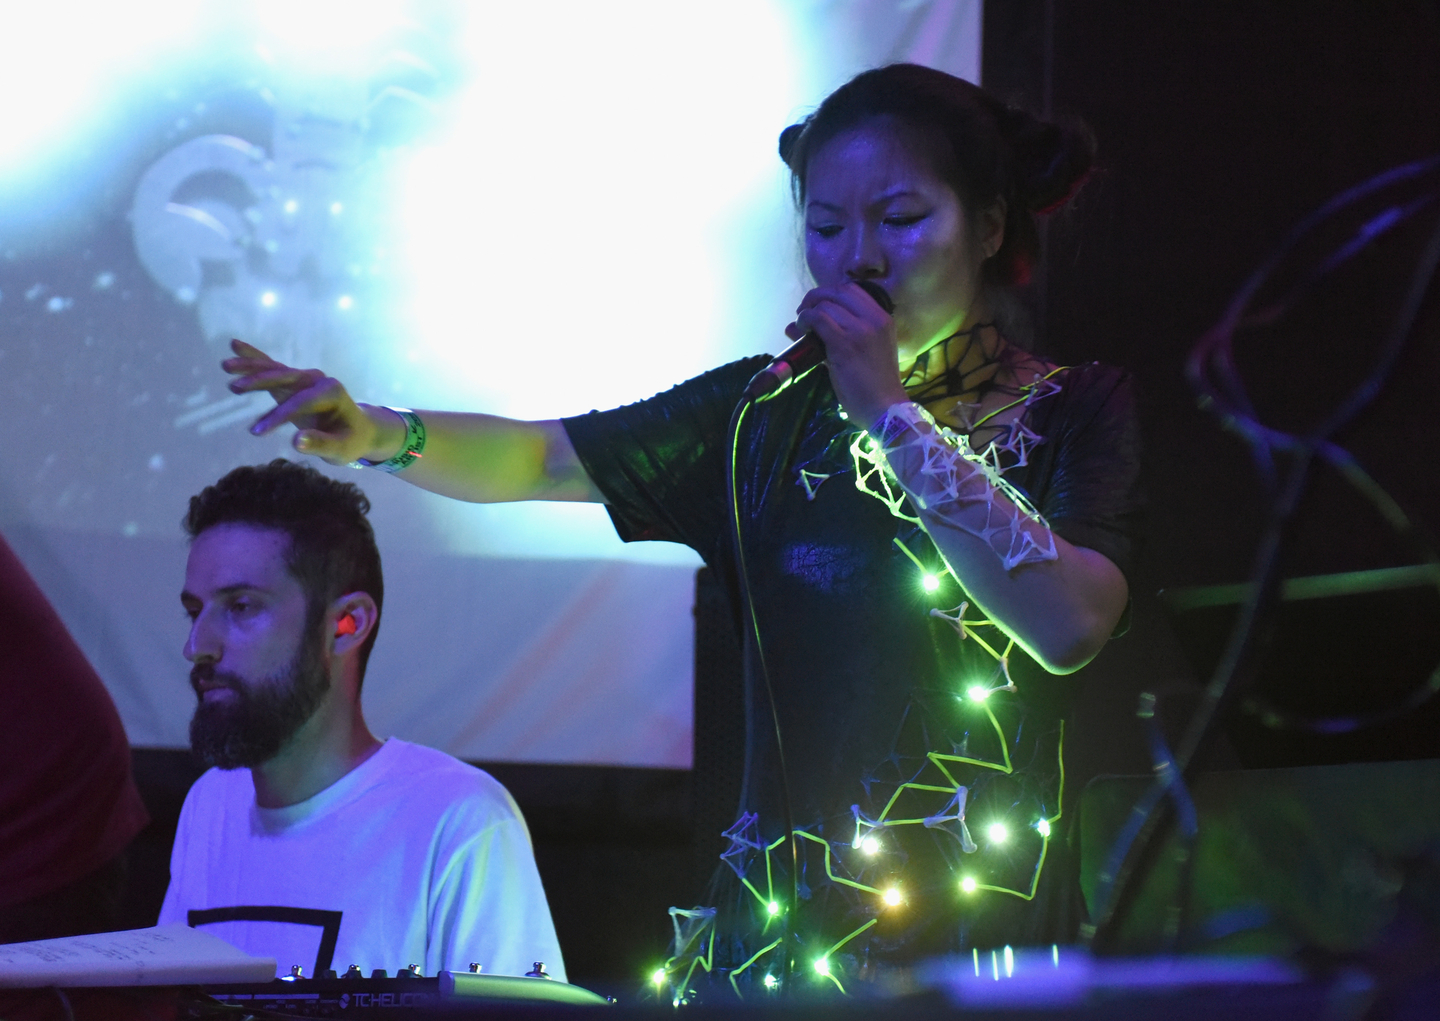 Jason Levine (L) and May Cheung of Scorpion Mouse perform onstage at the Lush presents Algorave: Live Coding Party at The Main II.